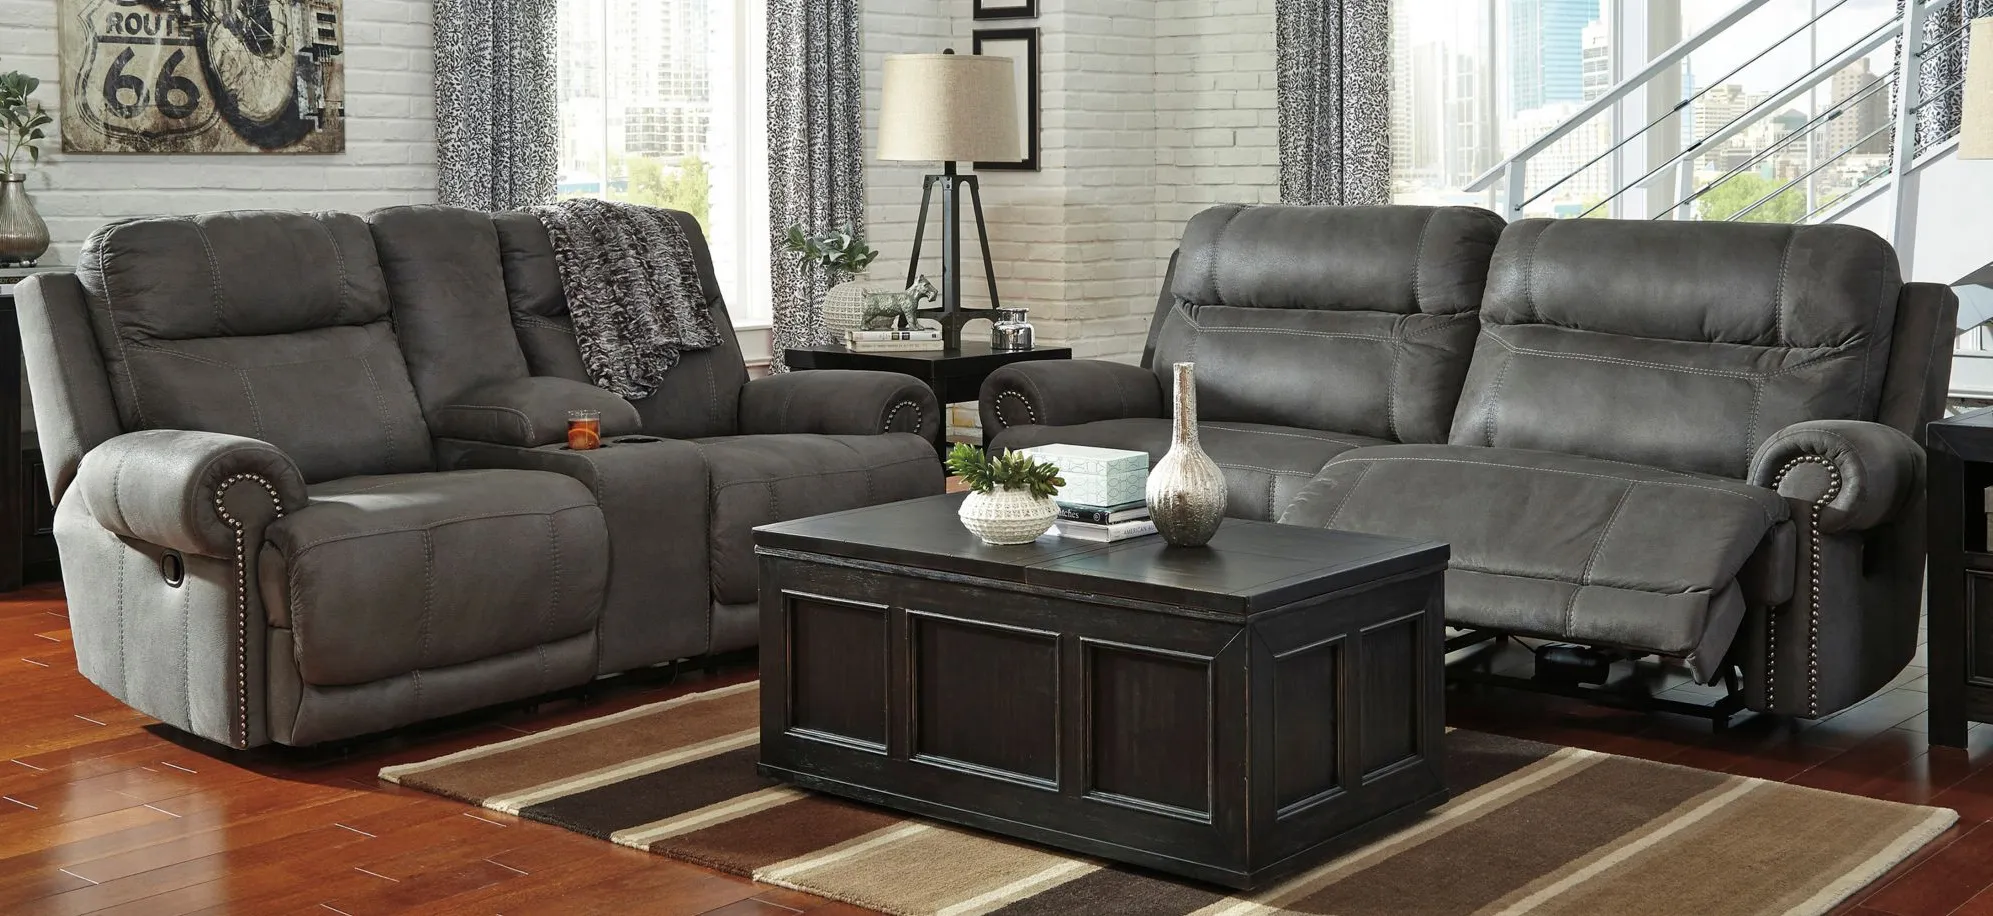 Romilly 2-pc. Reclining Sofa and Loveseat Set in Gray by Ashley Furniture